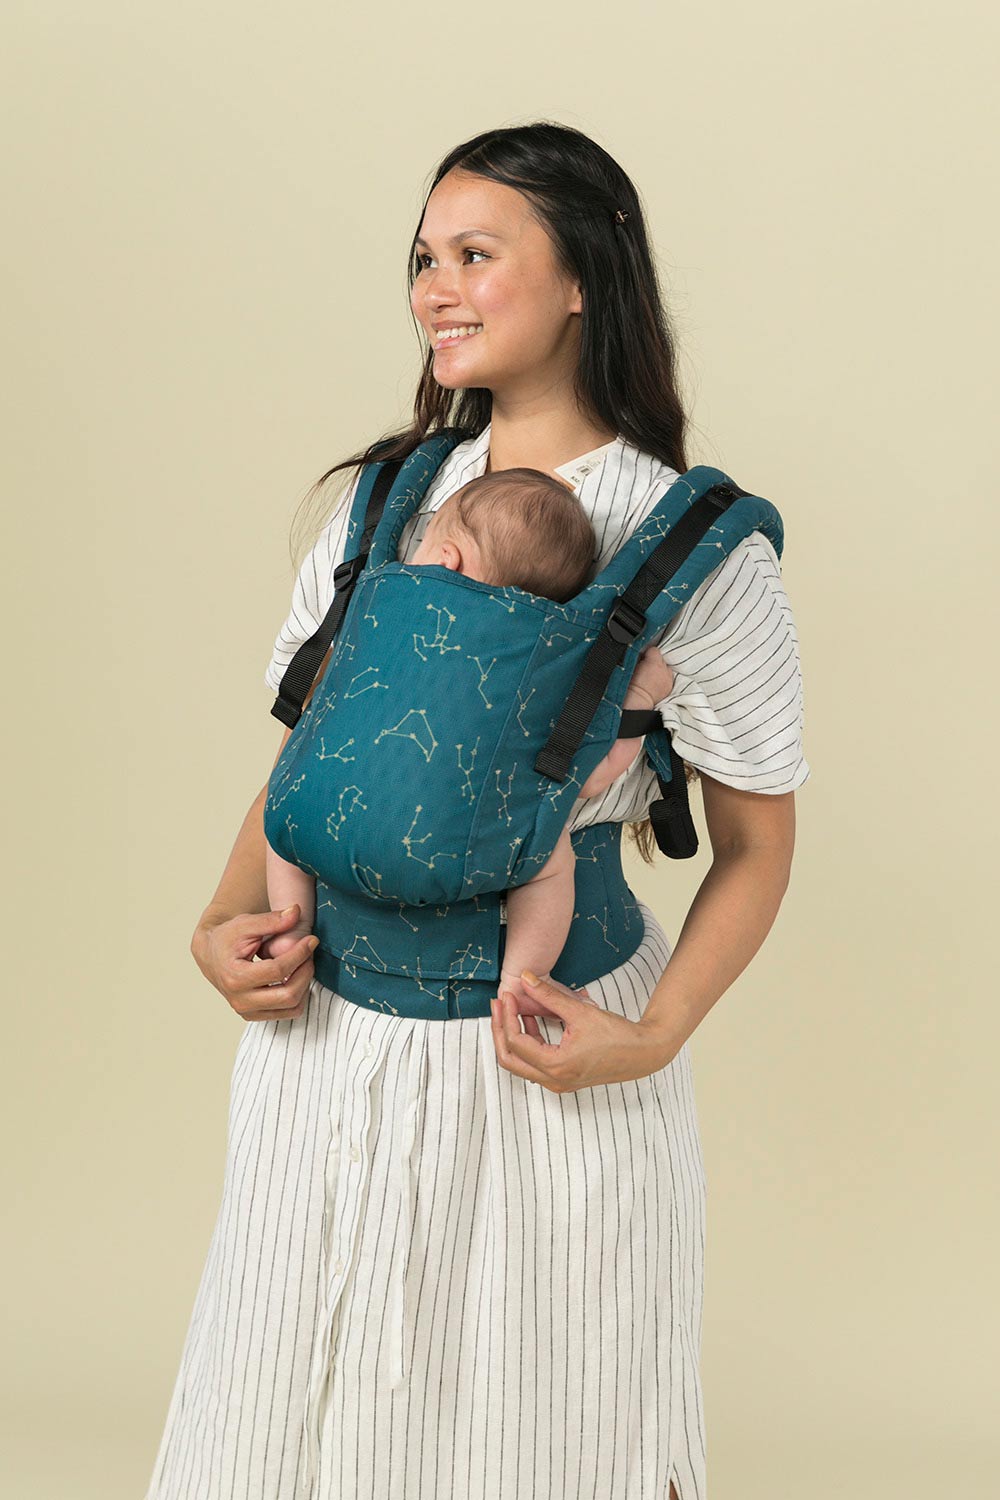 Constellation - Mesh Free-to-Grow Baby Carrier